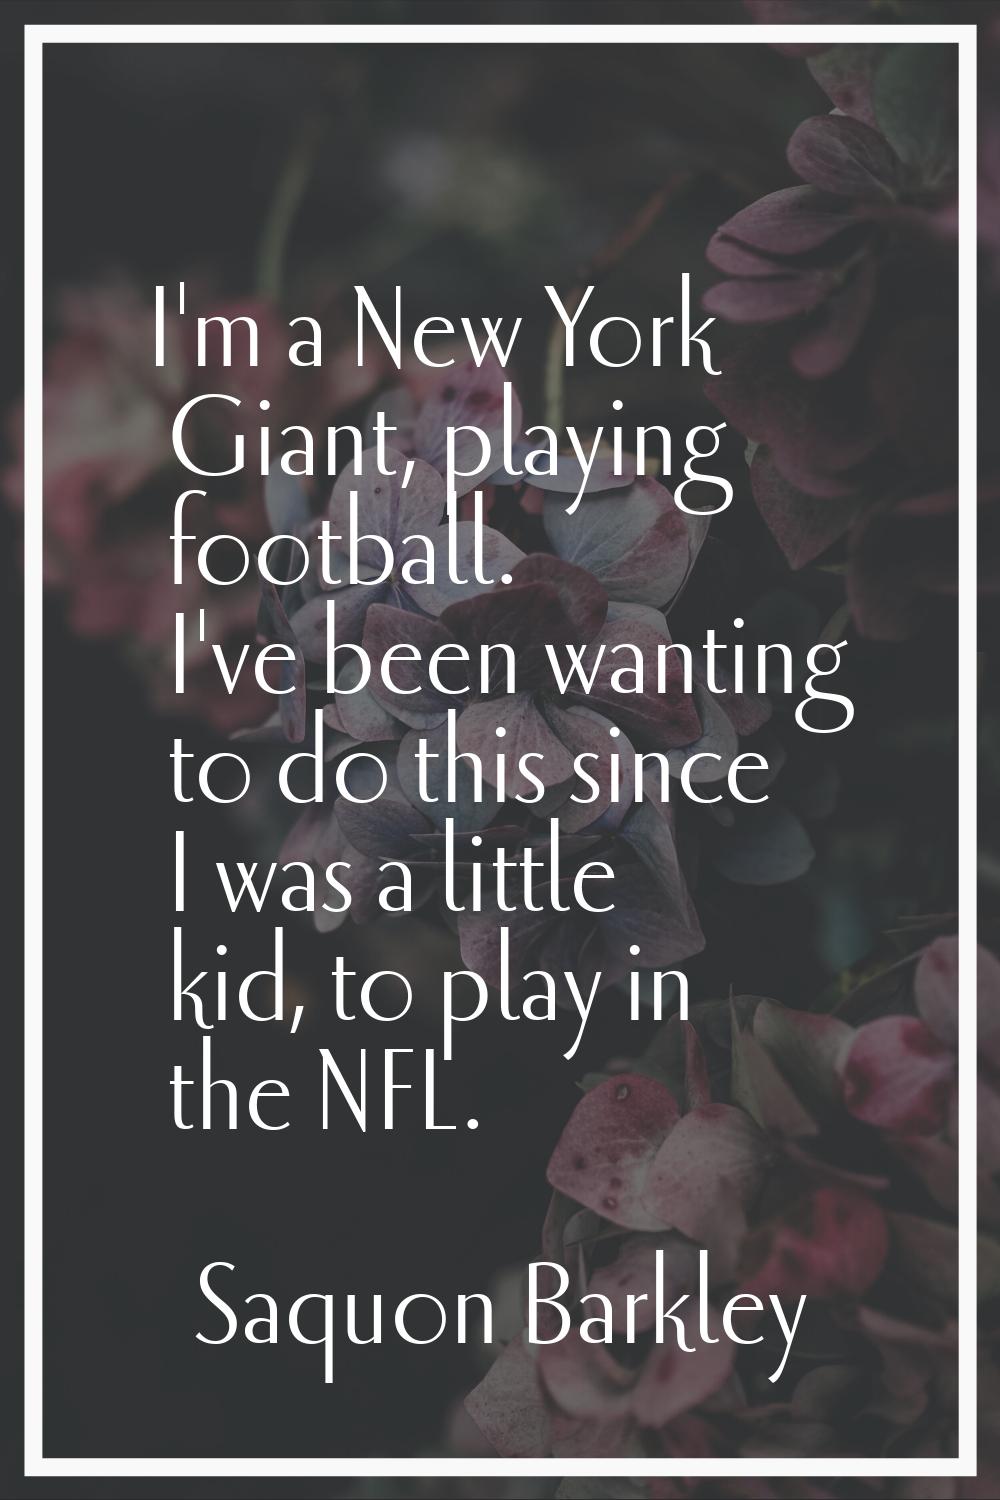 I'm a New York Giant, playing football. I've been wanting to do this since I was a little kid, to p